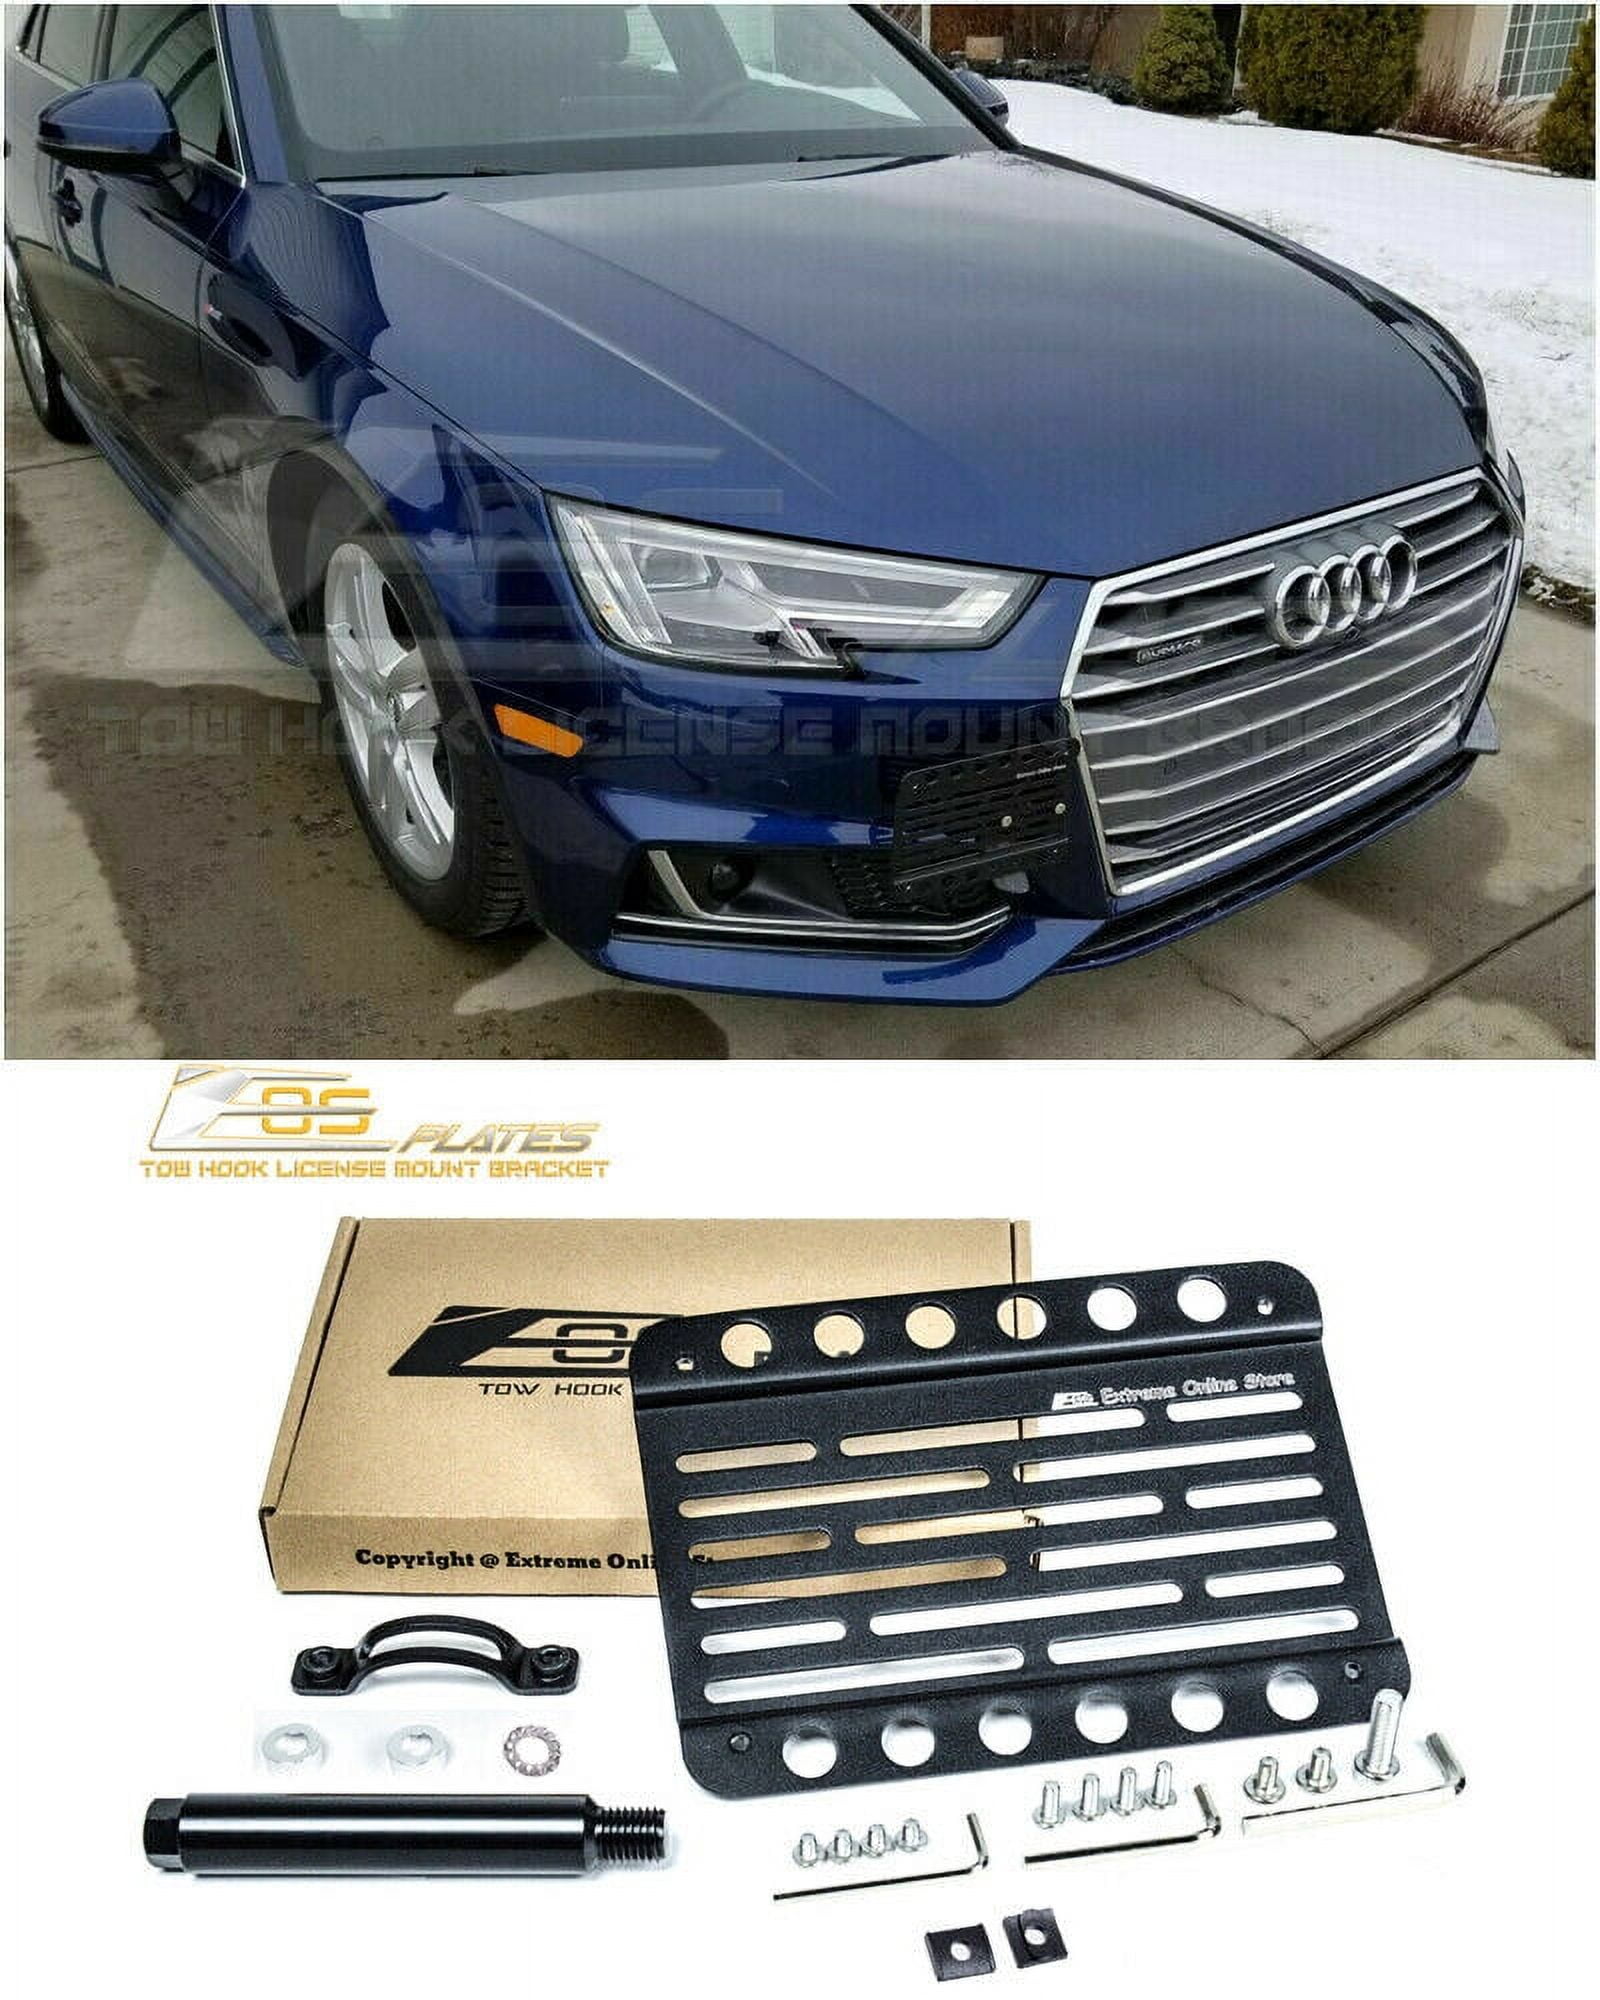 Replacement For 2017-Present Audi A4  EOS Plate Version 1 Front Bumper Tow  Hook License Relocator Mount Bracket Tow-400 (Mid Size) 